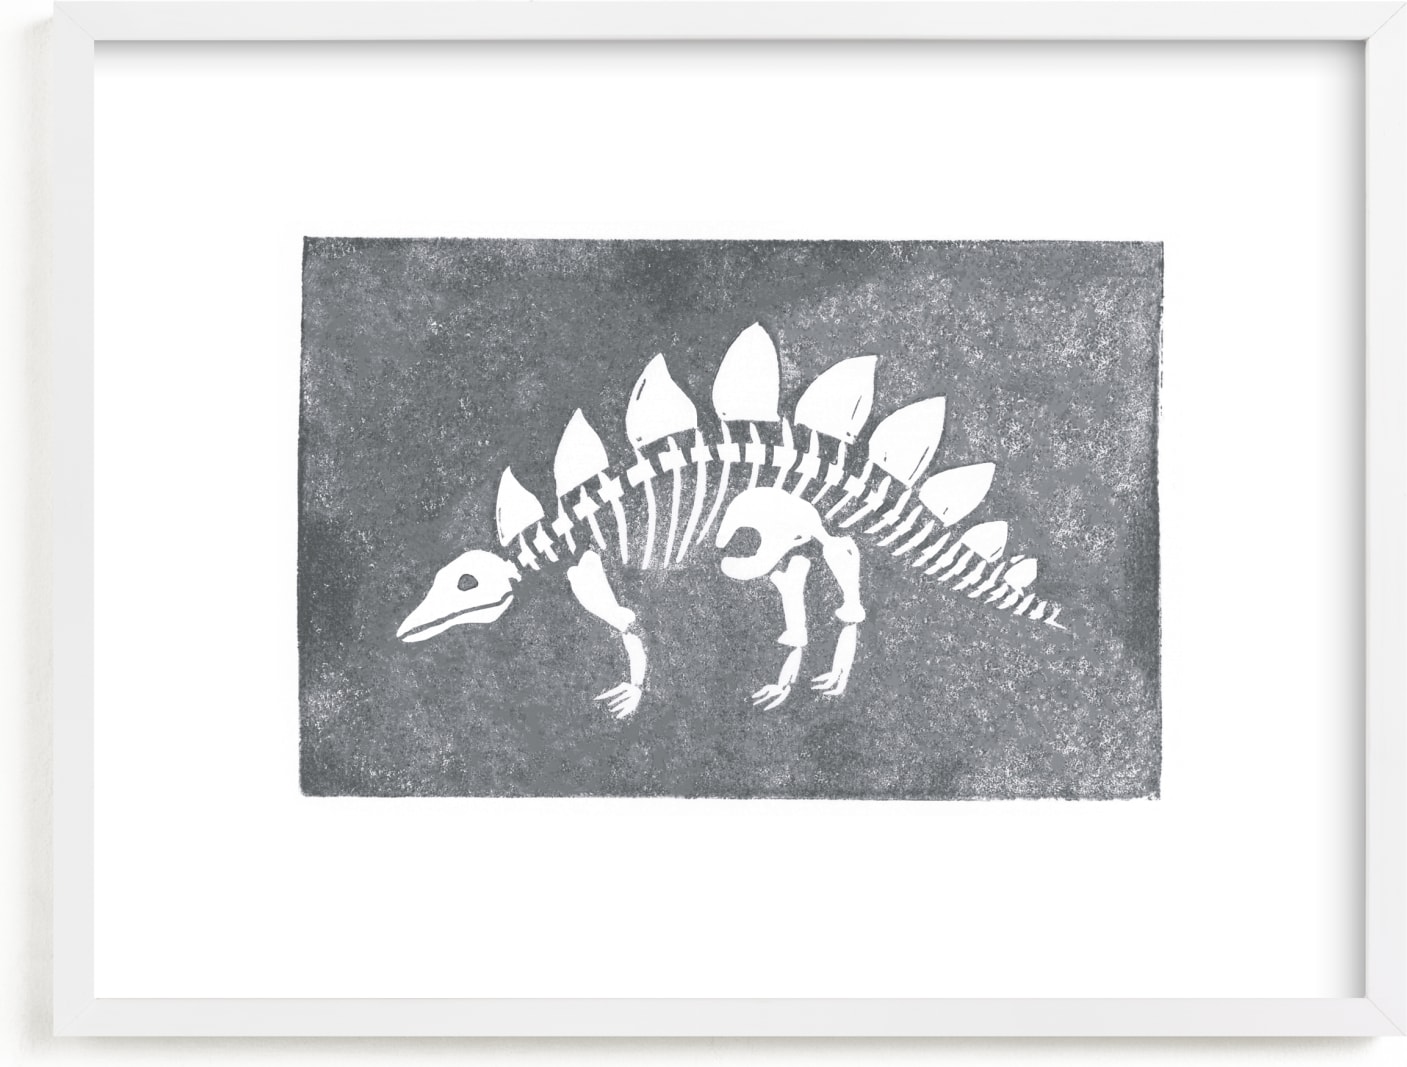 This is a black and white art by Teju Reval called Dino Fossils III.